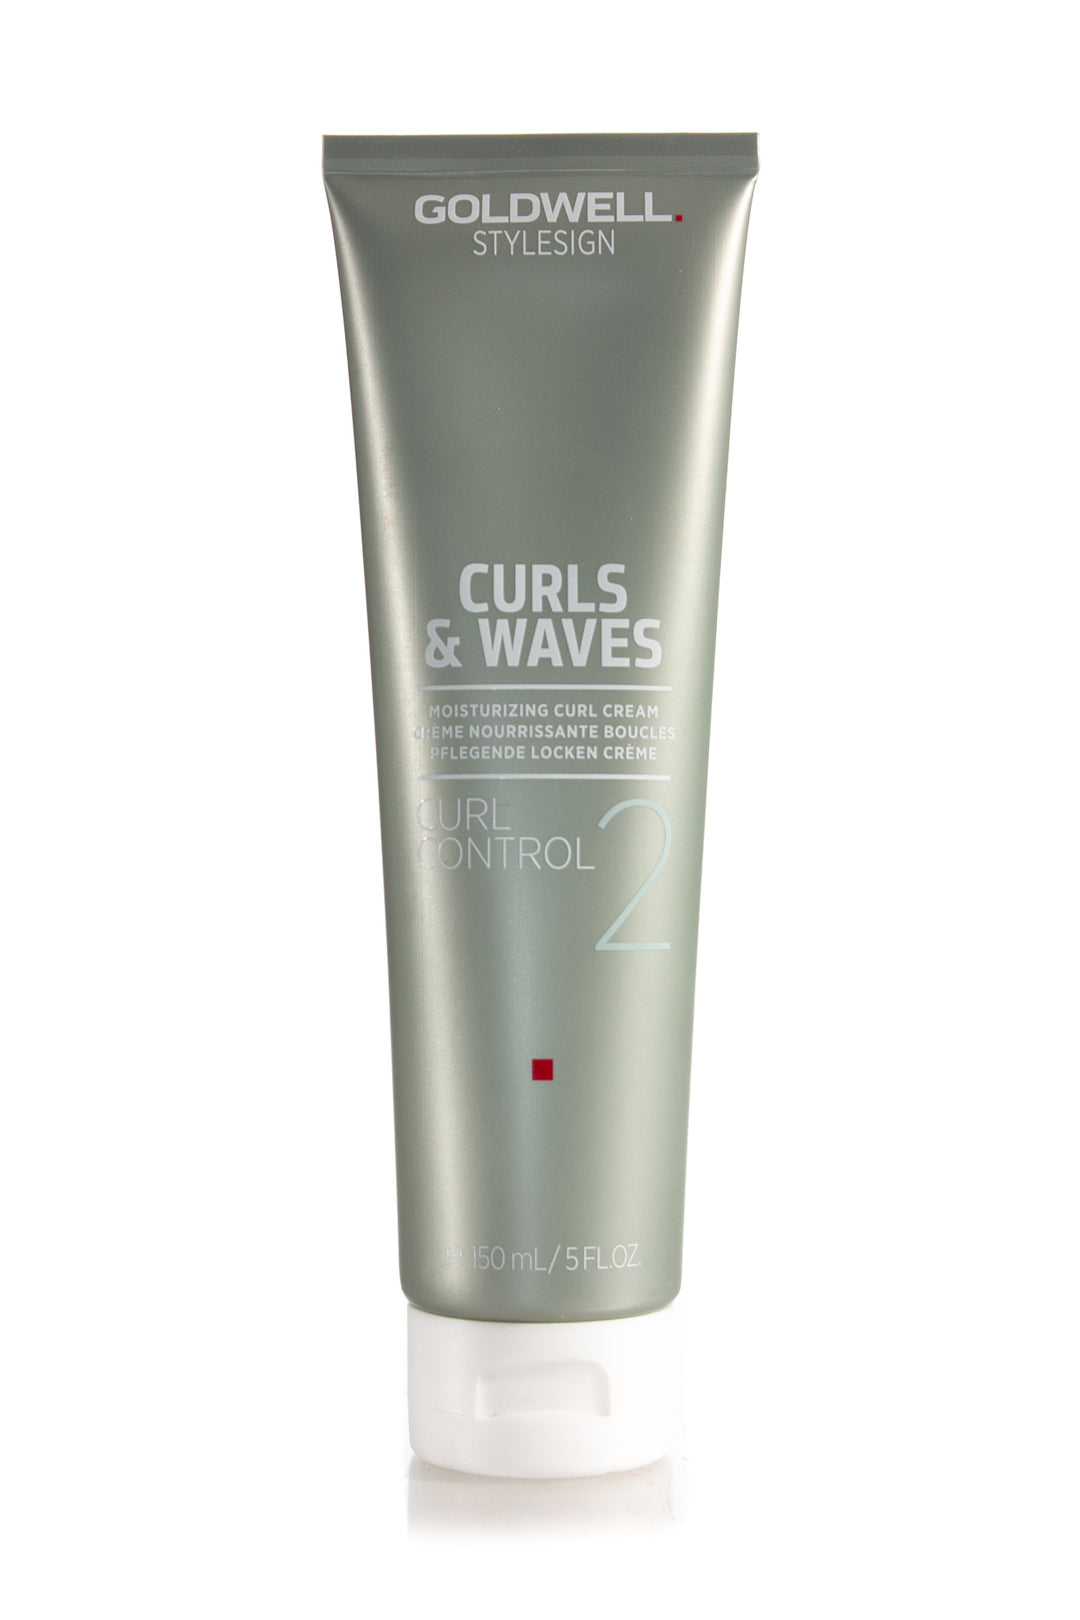 goldwell-stylesign-curly-and-waves-curl-control-150ml